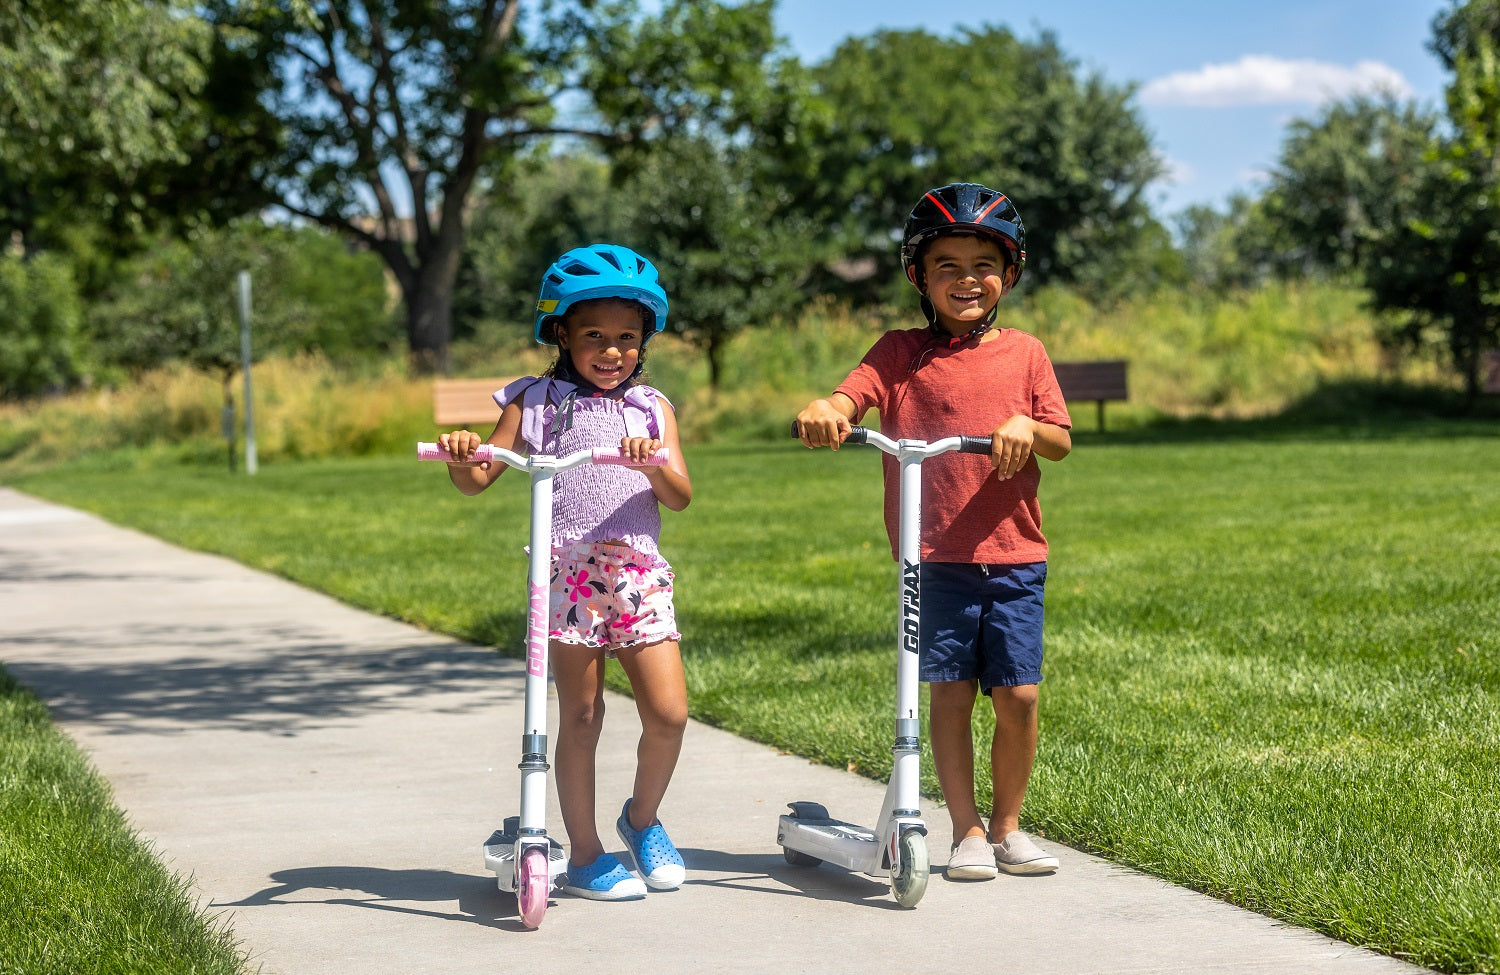 THE TOP 3 ELECTRIC SCOOTER FOR KIDS